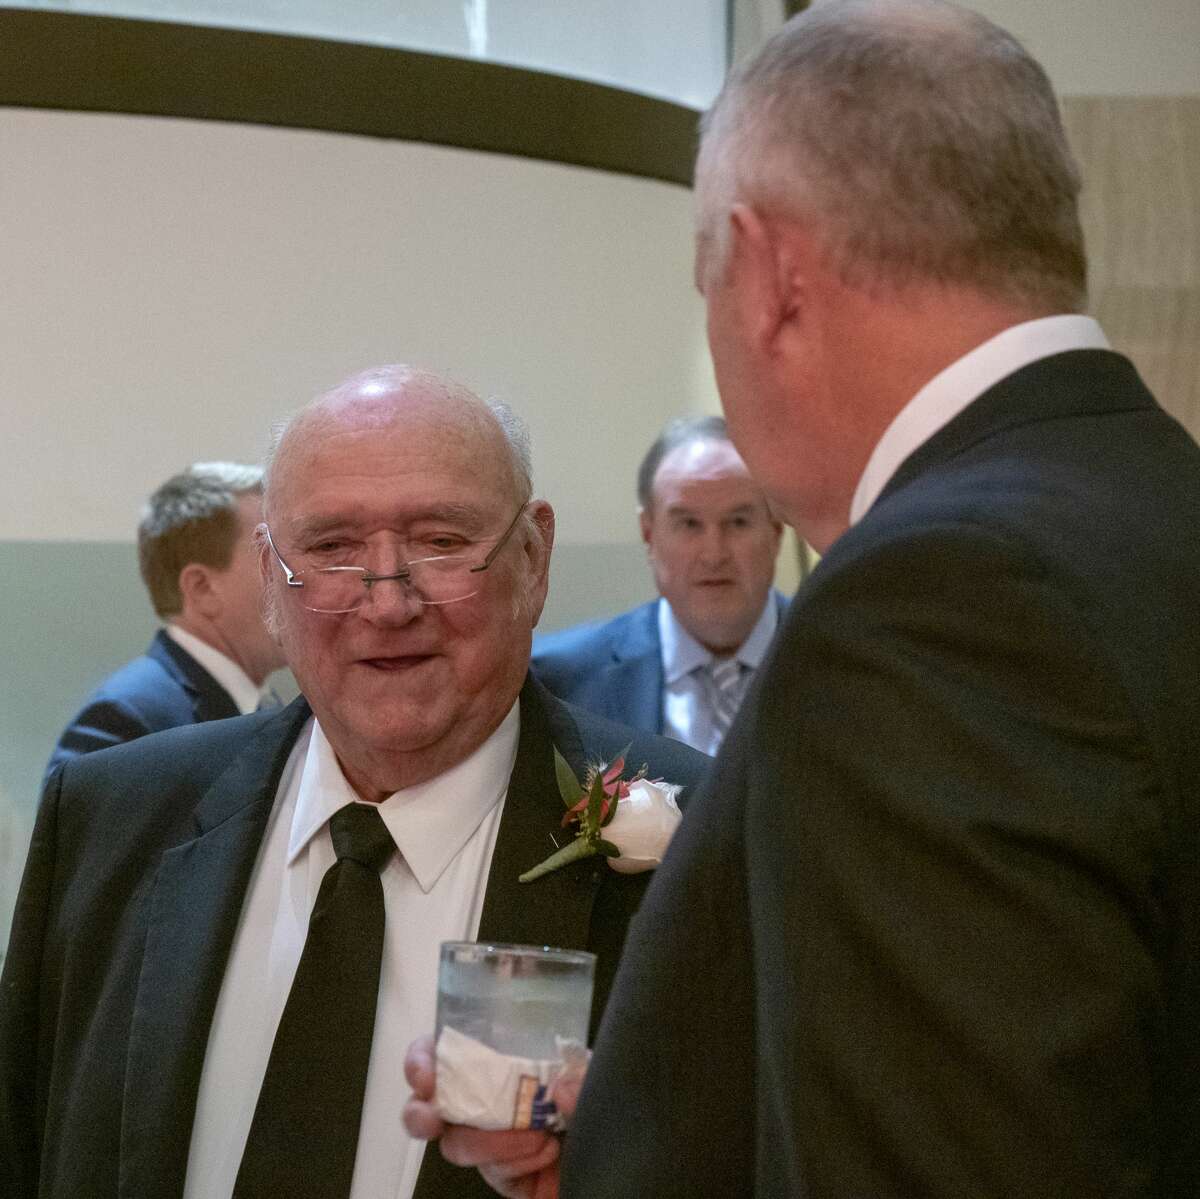 Friends and colleagues talk with and congratulate Dick Saulsbury Jan. 6, 2020 as he is honored by the Permian Basin Petroleum Association Top Hand Award at the Petroleum Club.